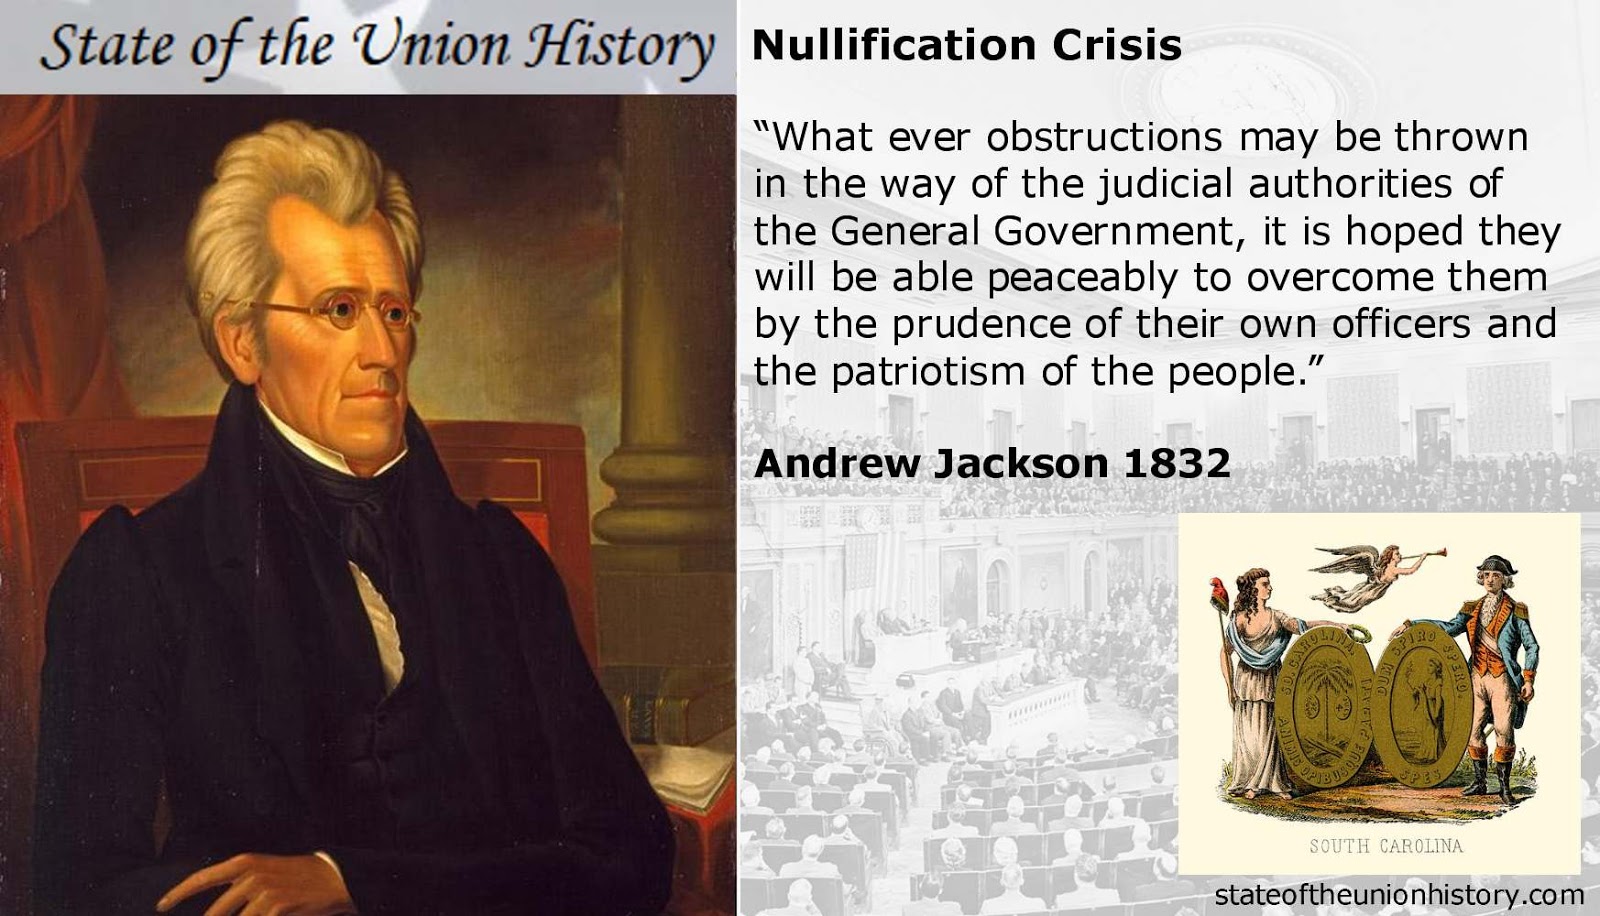 State of the Union History: 1832 Andrew Jackson - Nullification Crisis